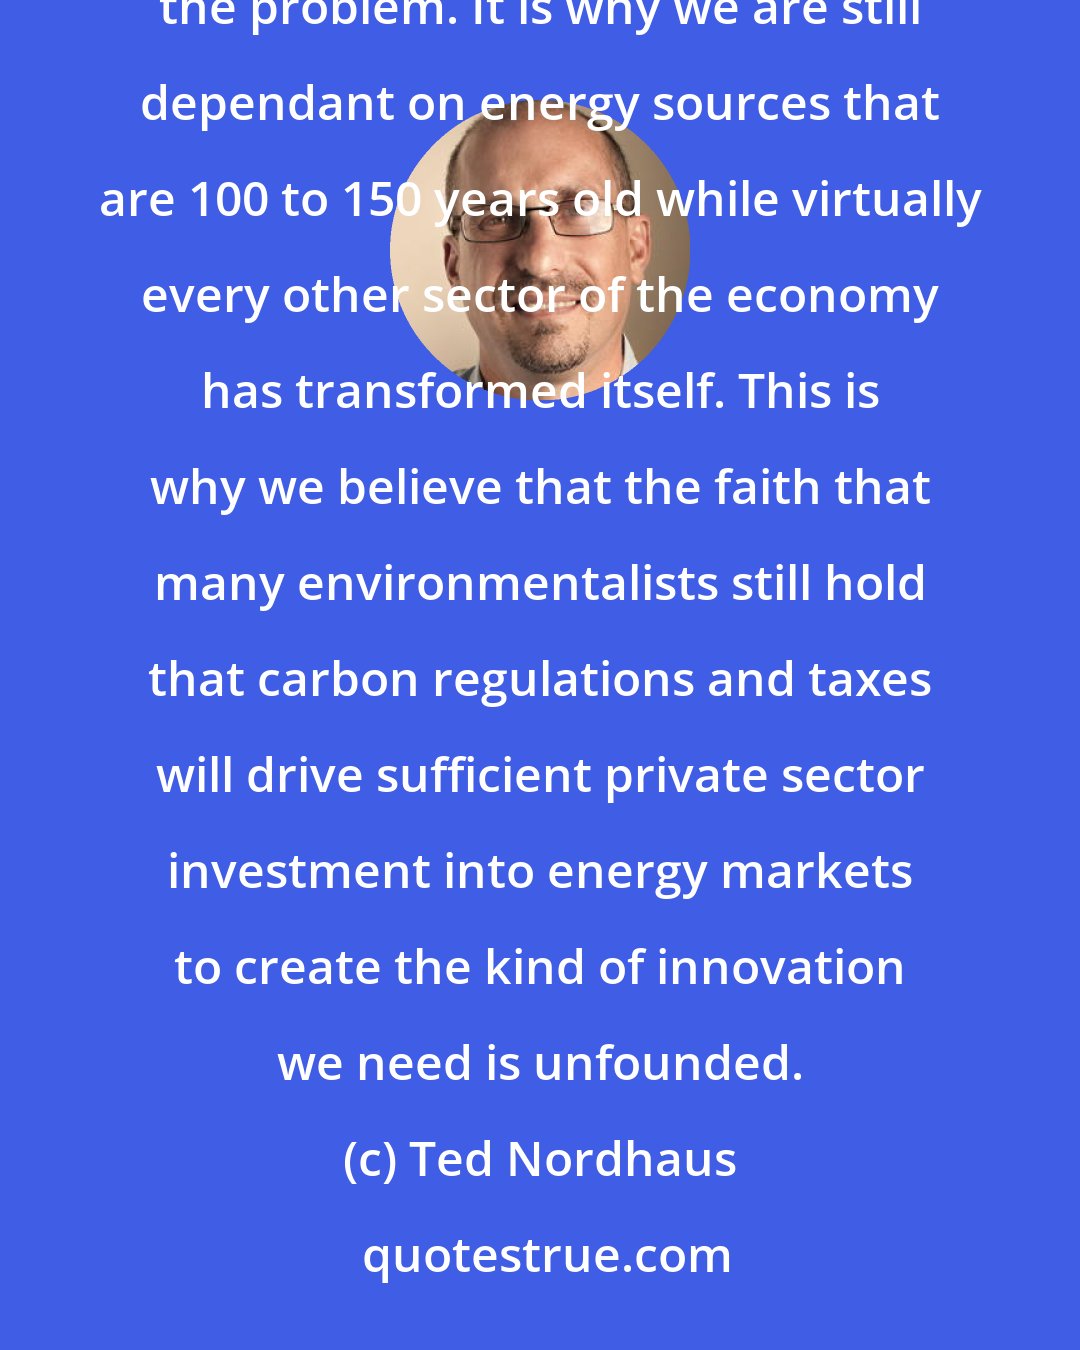 Ted Nordhaus: Energy is a sector of the economy that has been particularly resistant to innovation. This is precisely the problem. It is why we are still dependant on energy sources that are 100 to 150 years old while virtually every other sector of the economy has transformed itself. This is why we believe that the faith that many environmentalists still hold that carbon regulations and taxes will drive sufficient private sector investment into energy markets to create the kind of innovation we need is unfounded.